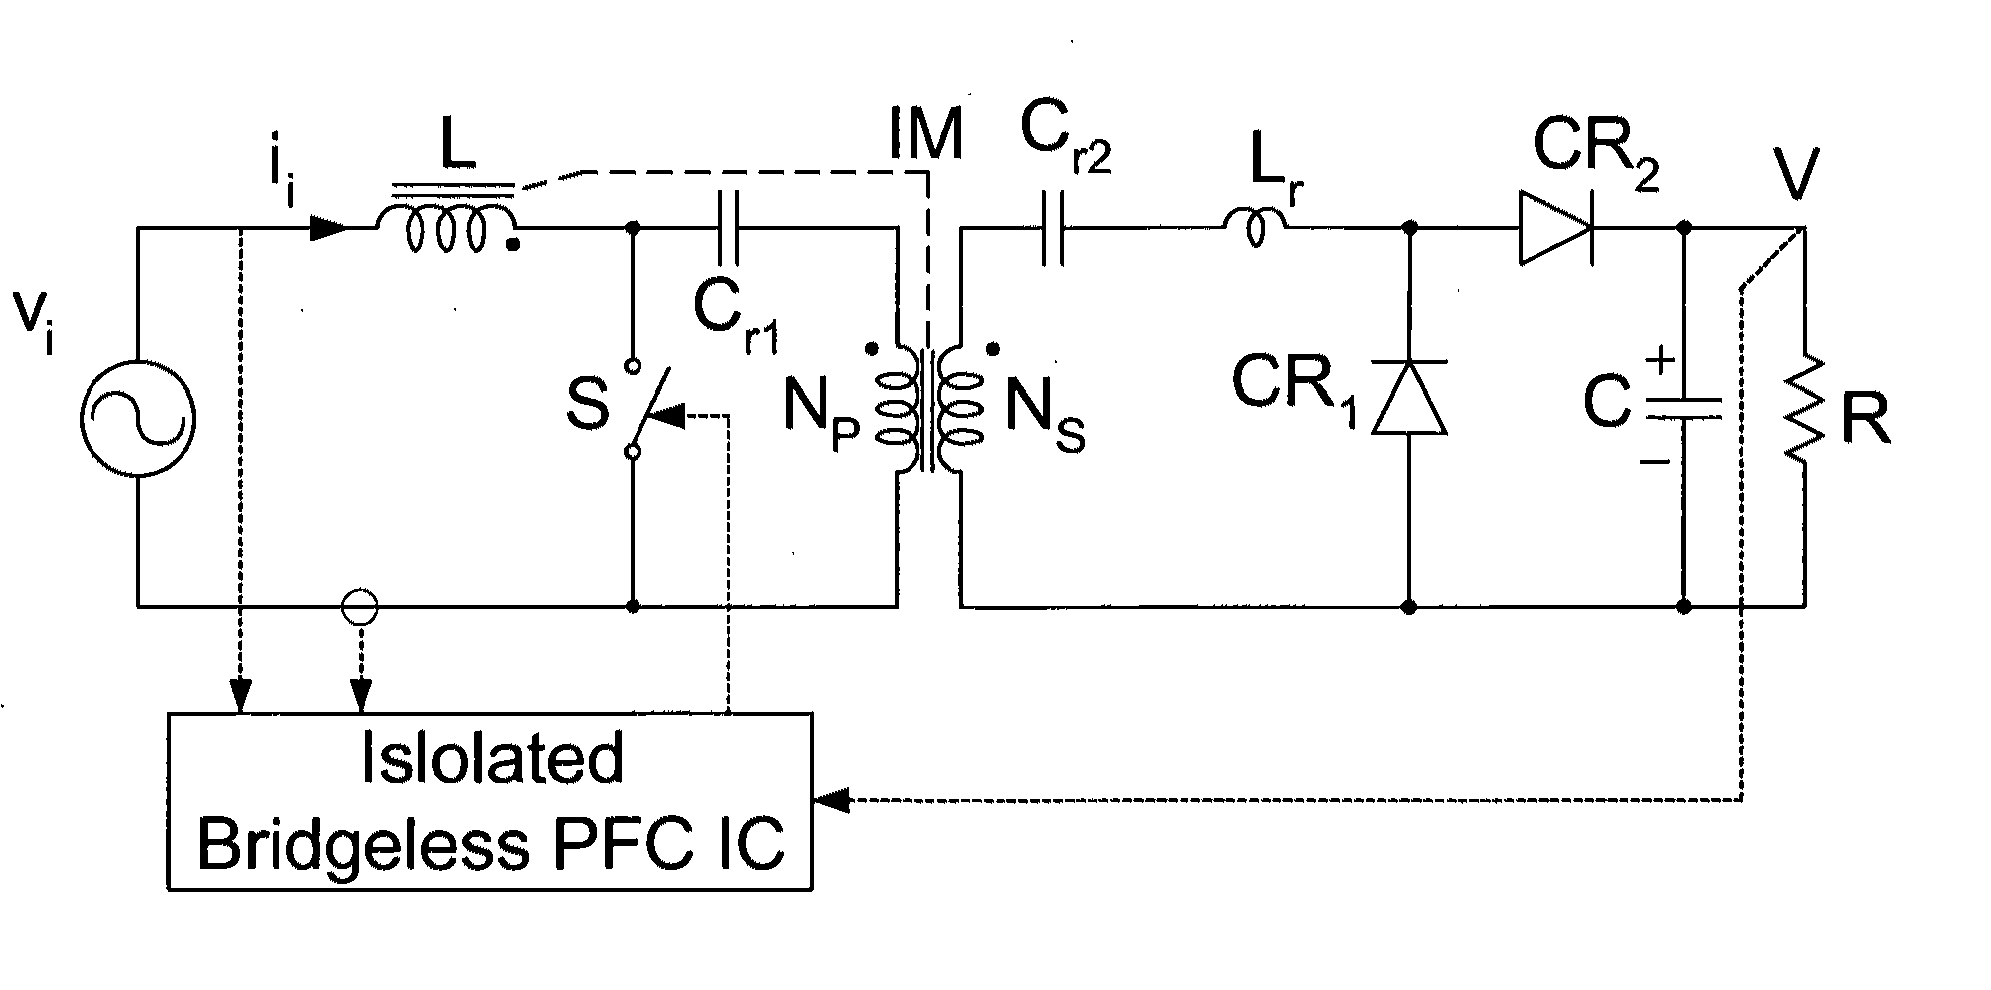 Three-phase isolated rectifer with power factor correction